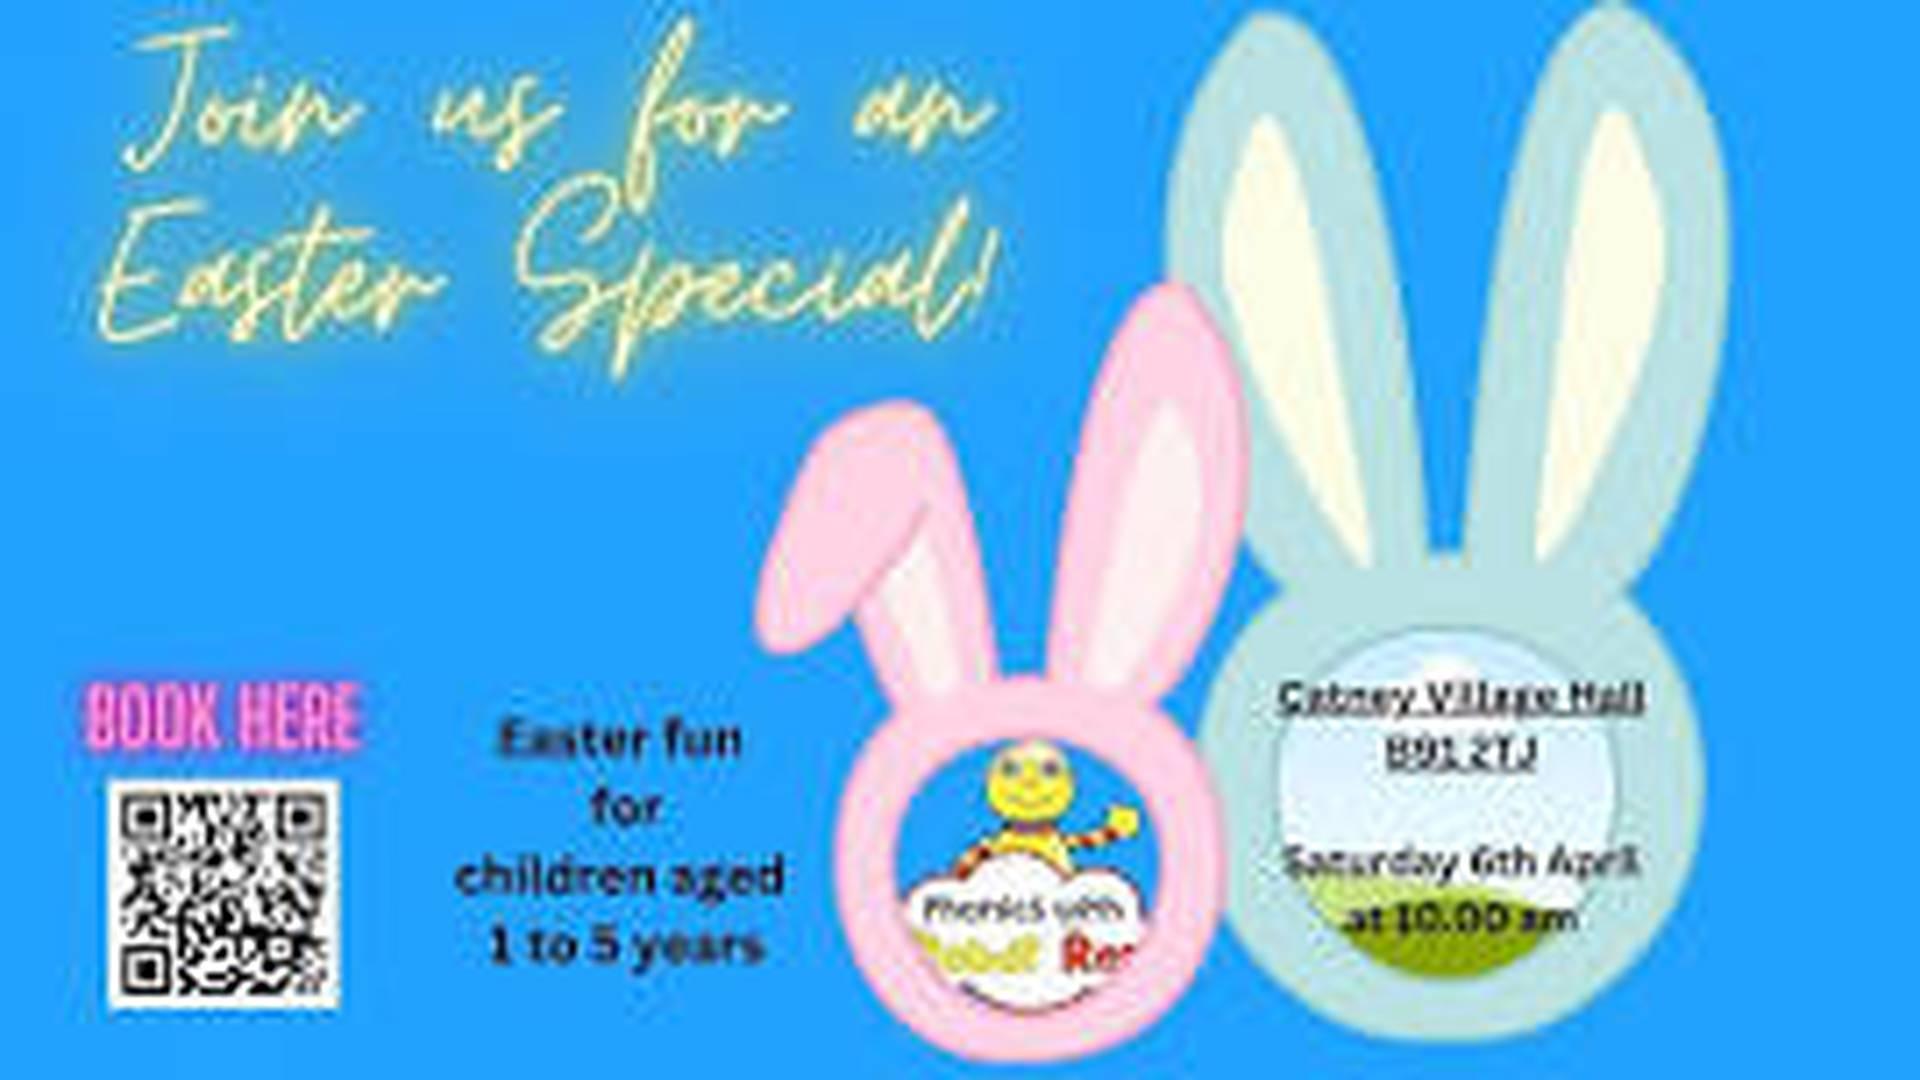 Easter Special for Children Aged 1 to 5 years photo